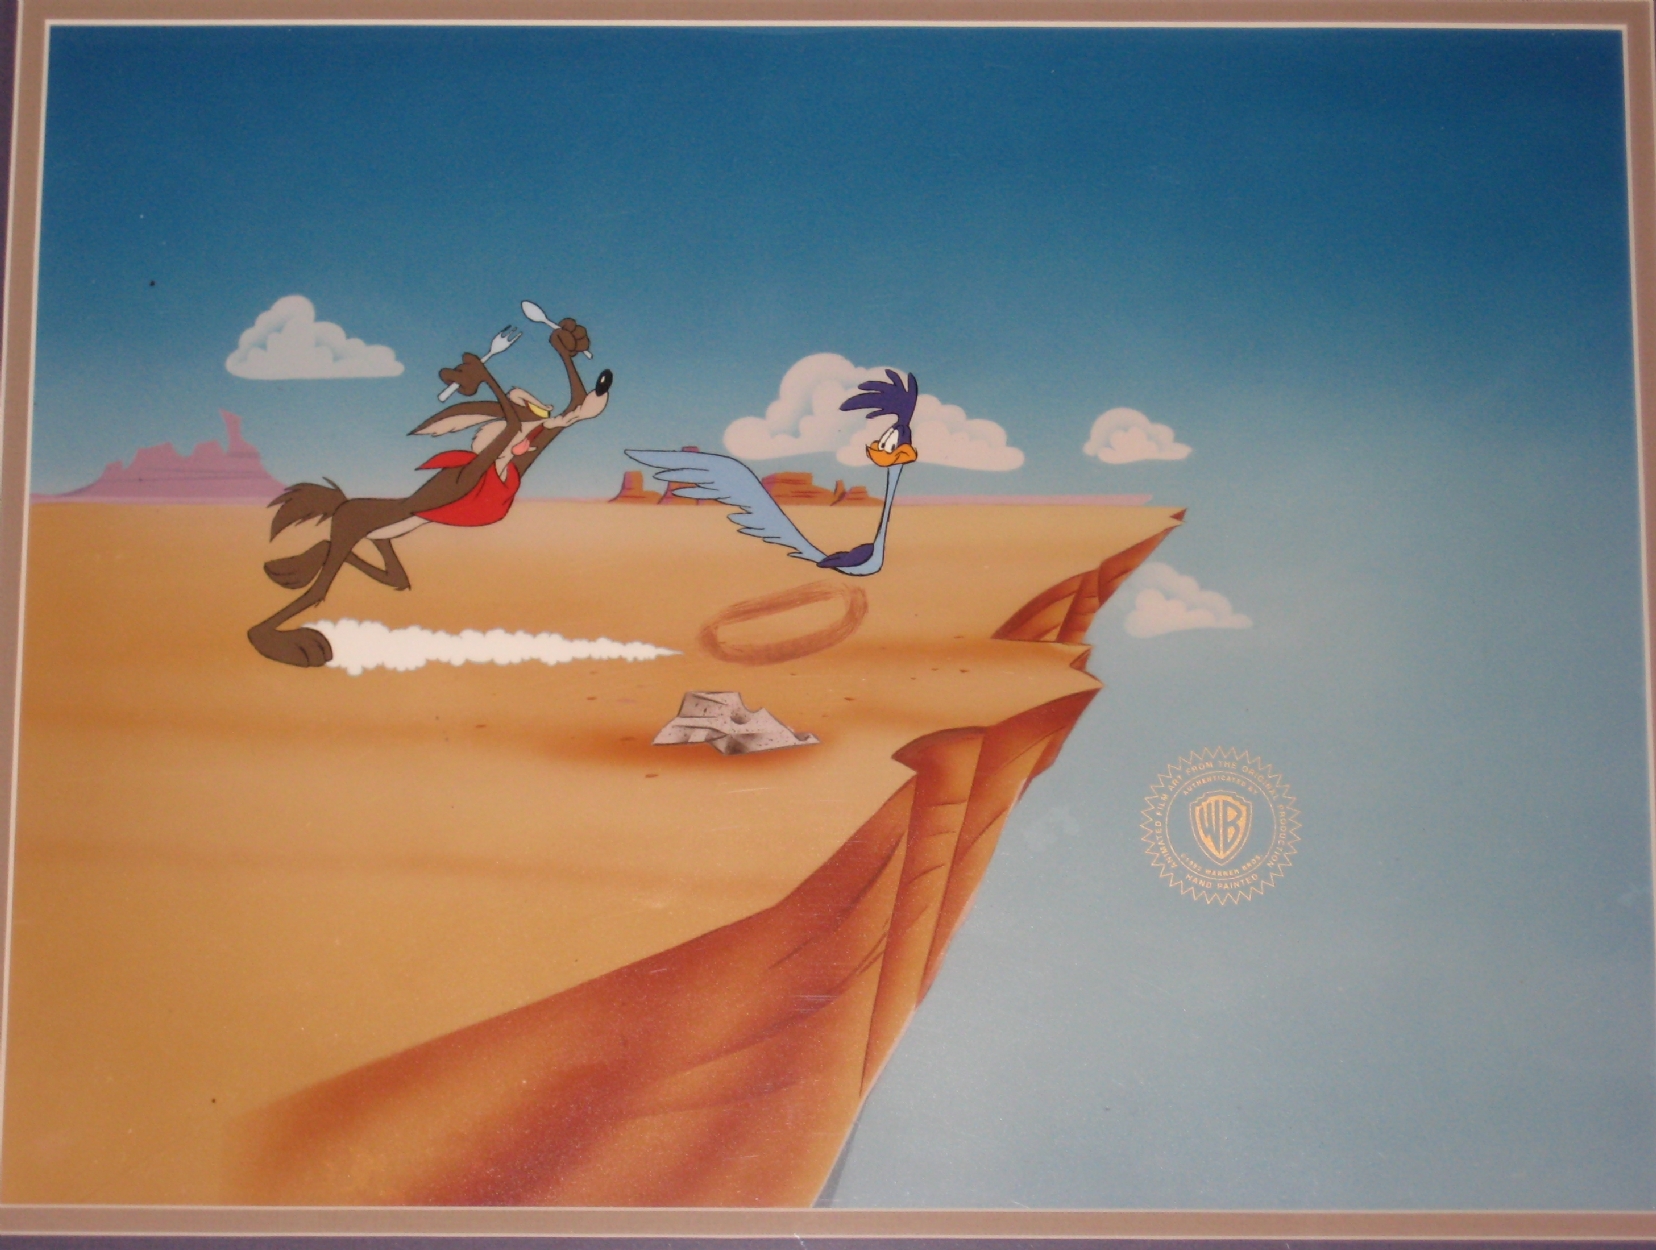 Popcultcha - Meep! Meep! Road Runner & Wile E. Coyote have